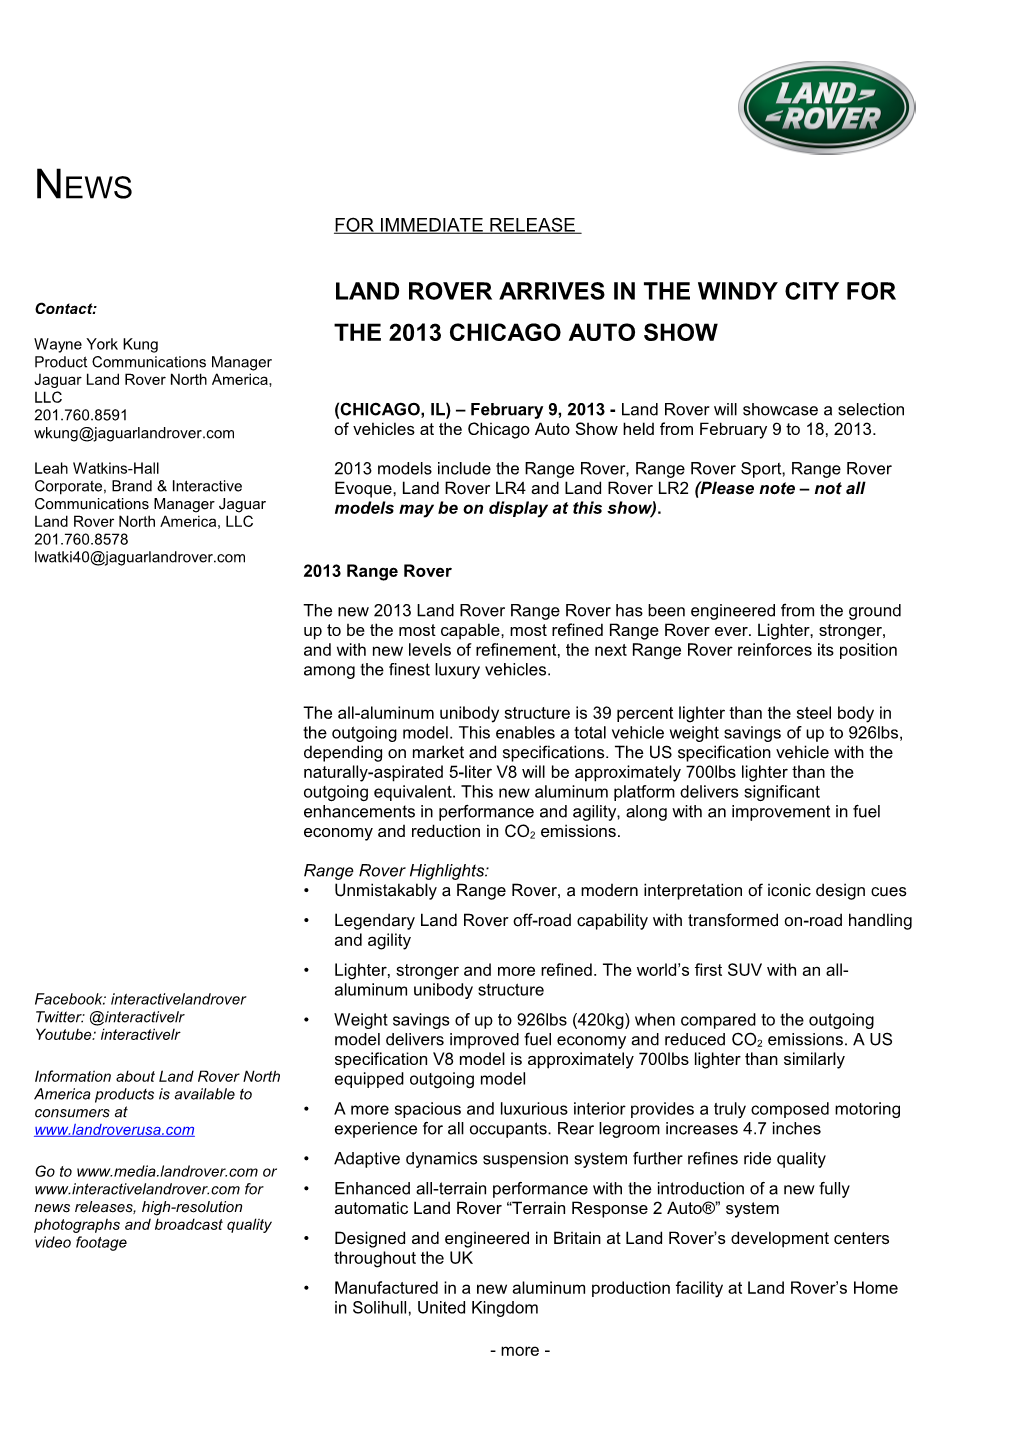 For Immediate Release Land Rover Arrives in the Windy City for the 2013 Chicago Auto Show